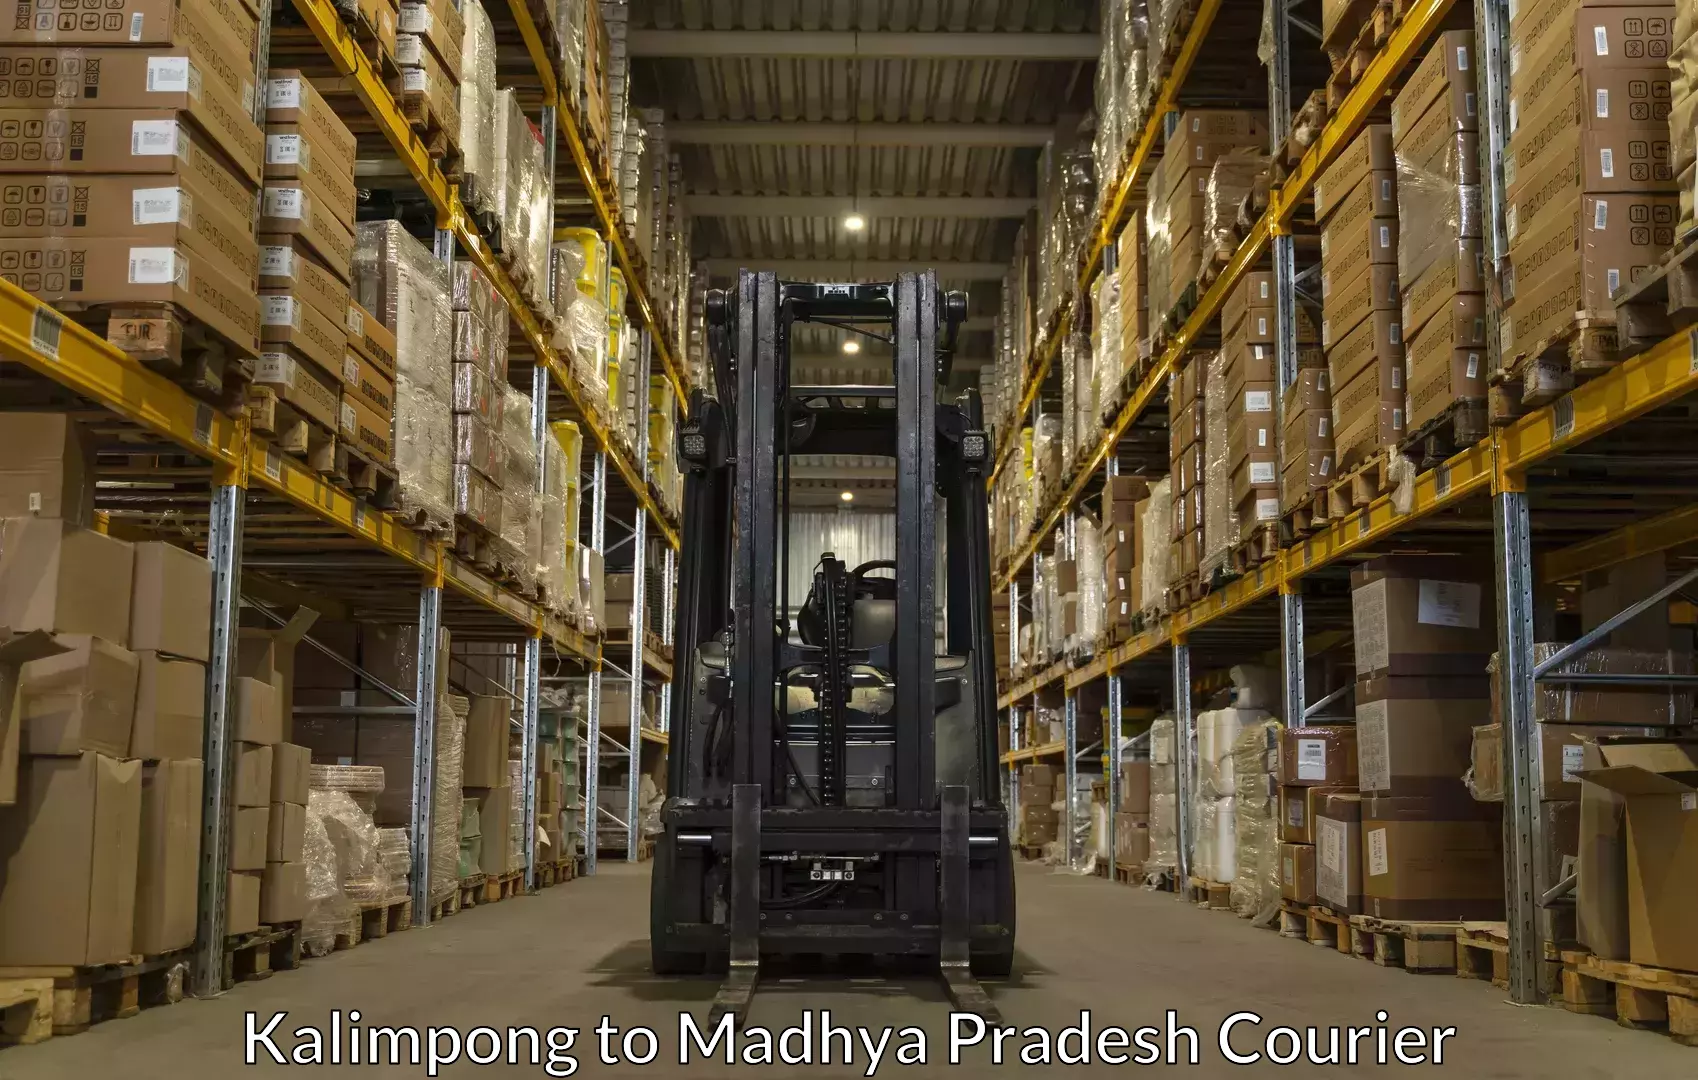 Luggage shipping specialists Kalimpong to Gosalpur